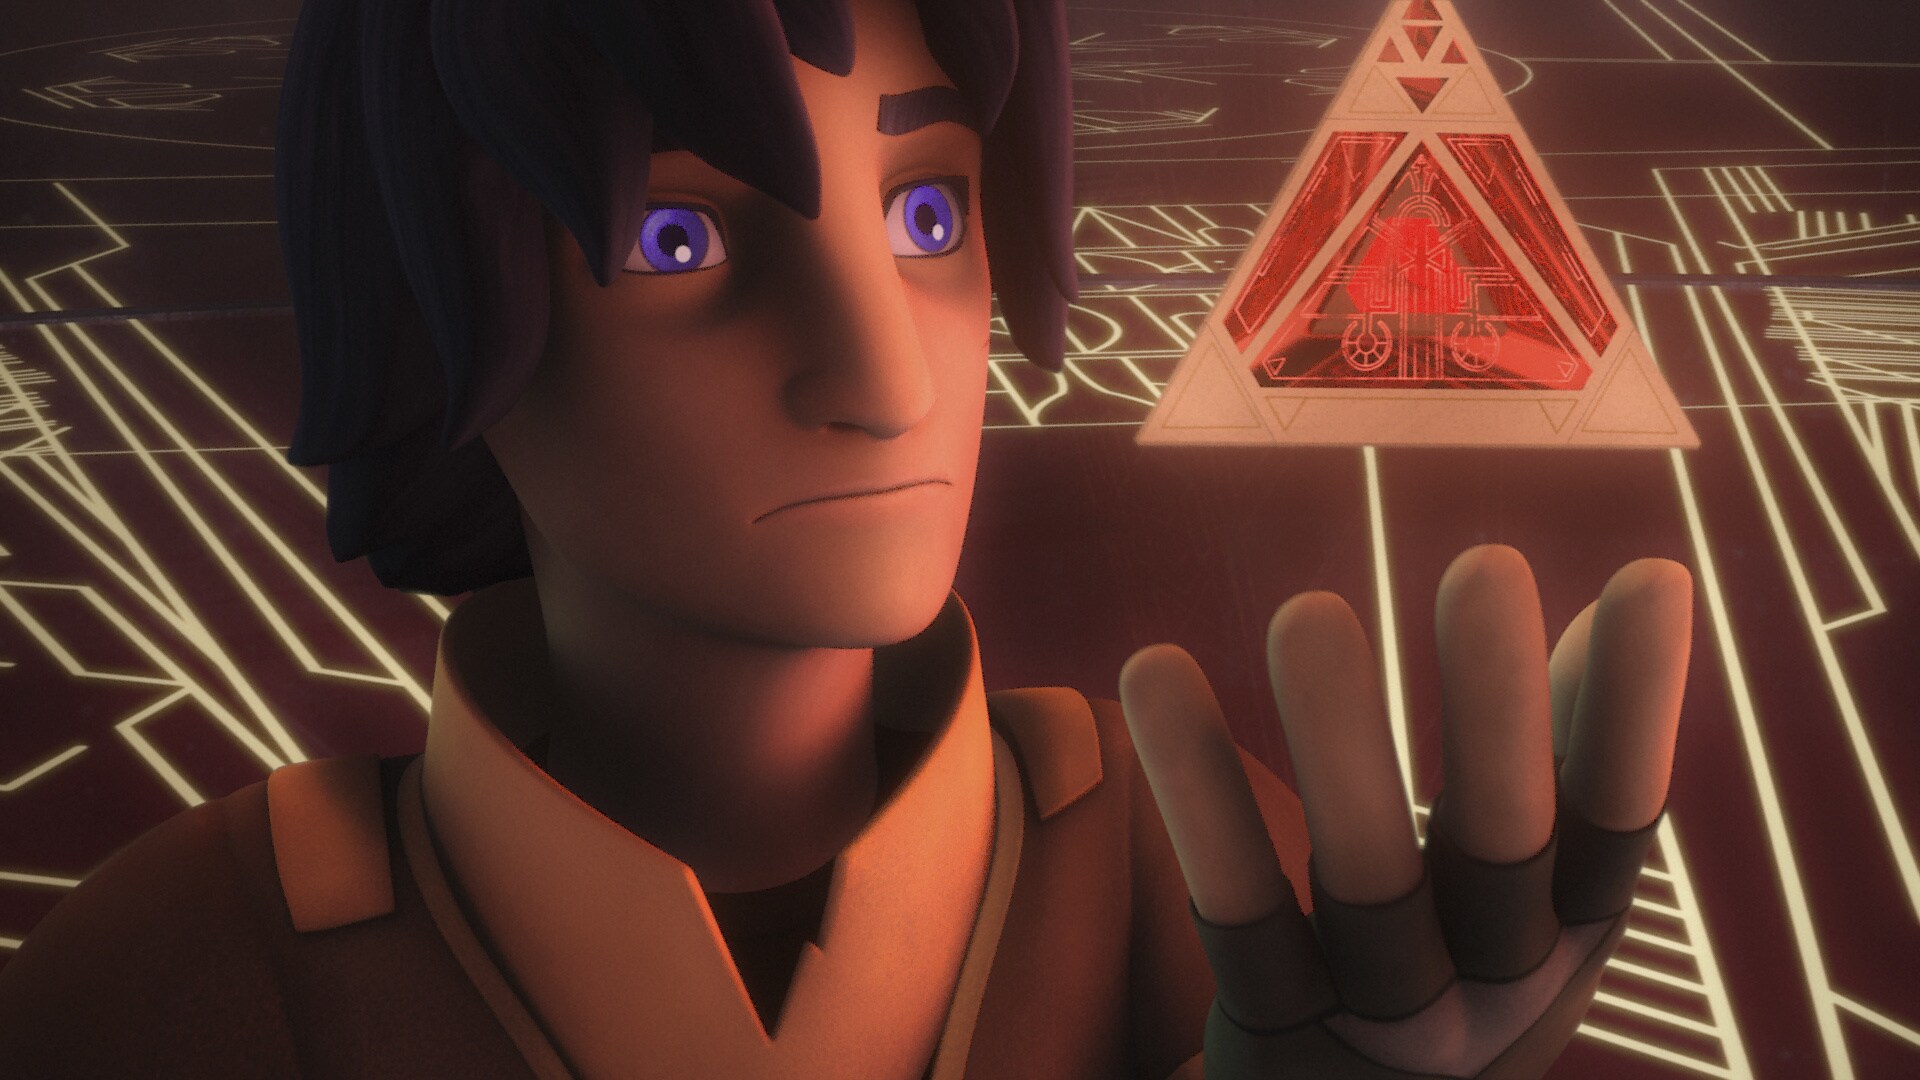 Sith Lord Maul tricked Ezra into unlocking a Sith holocron.